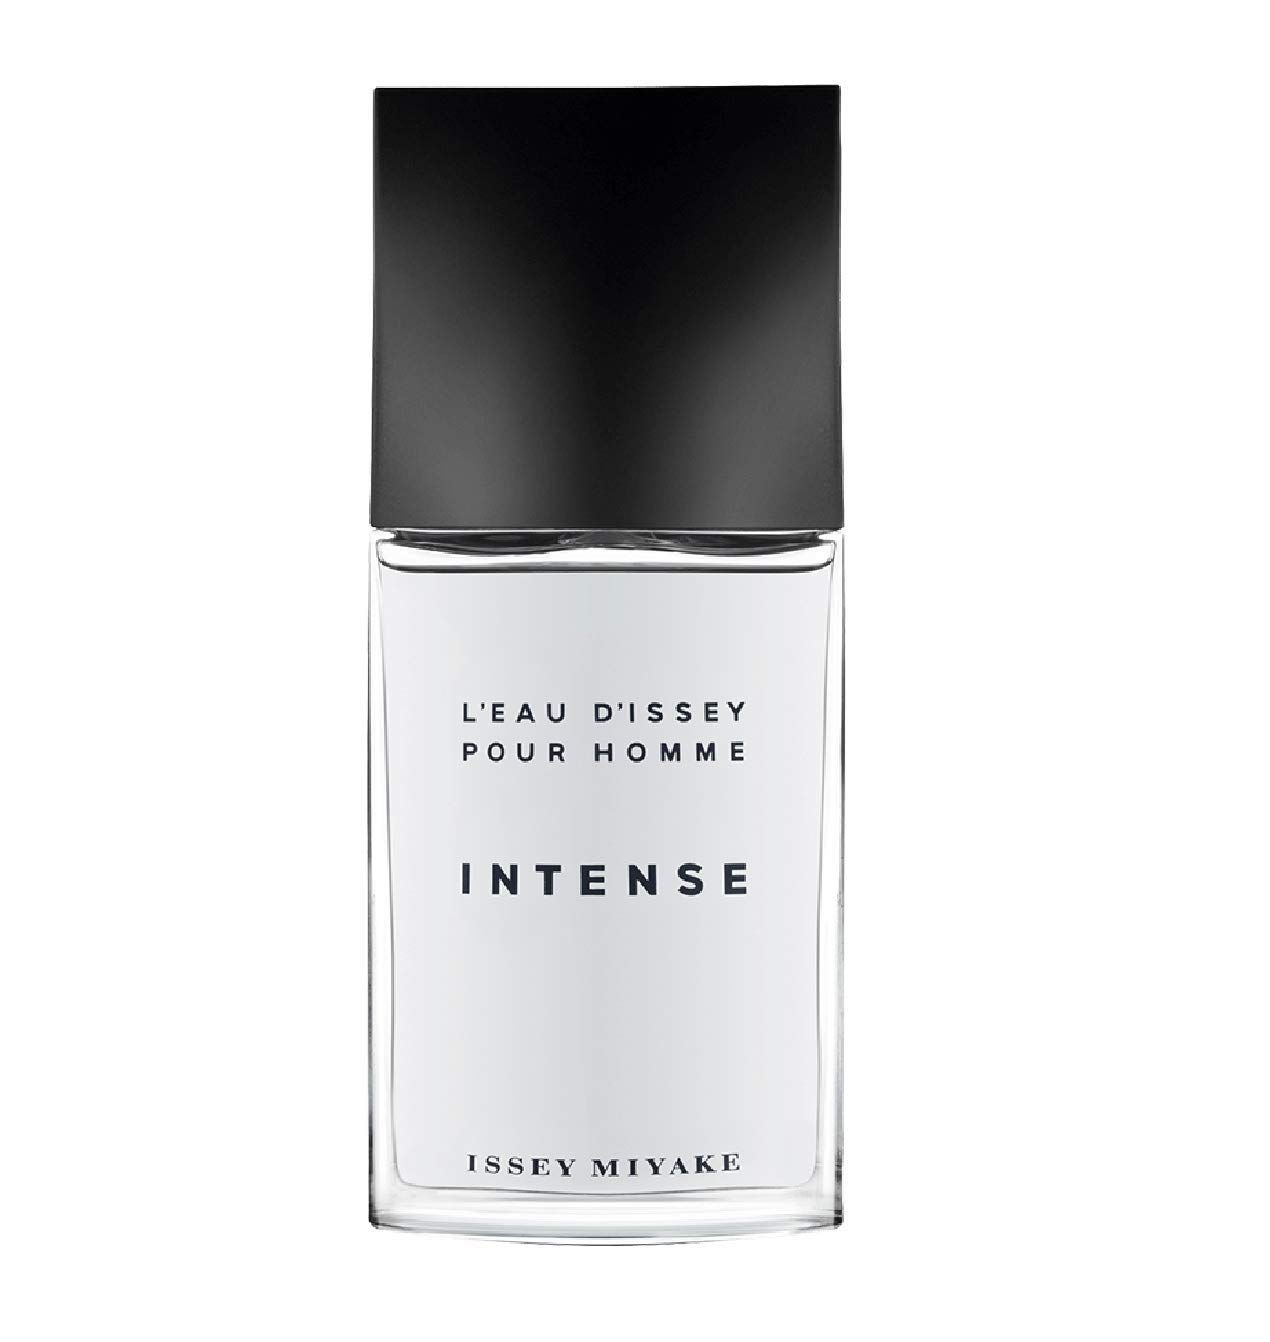 L’EAU D’ISSEY POUR HOMME INTENSE by Issey Miyake EDT SPRAY 4.2 OZ for MEN